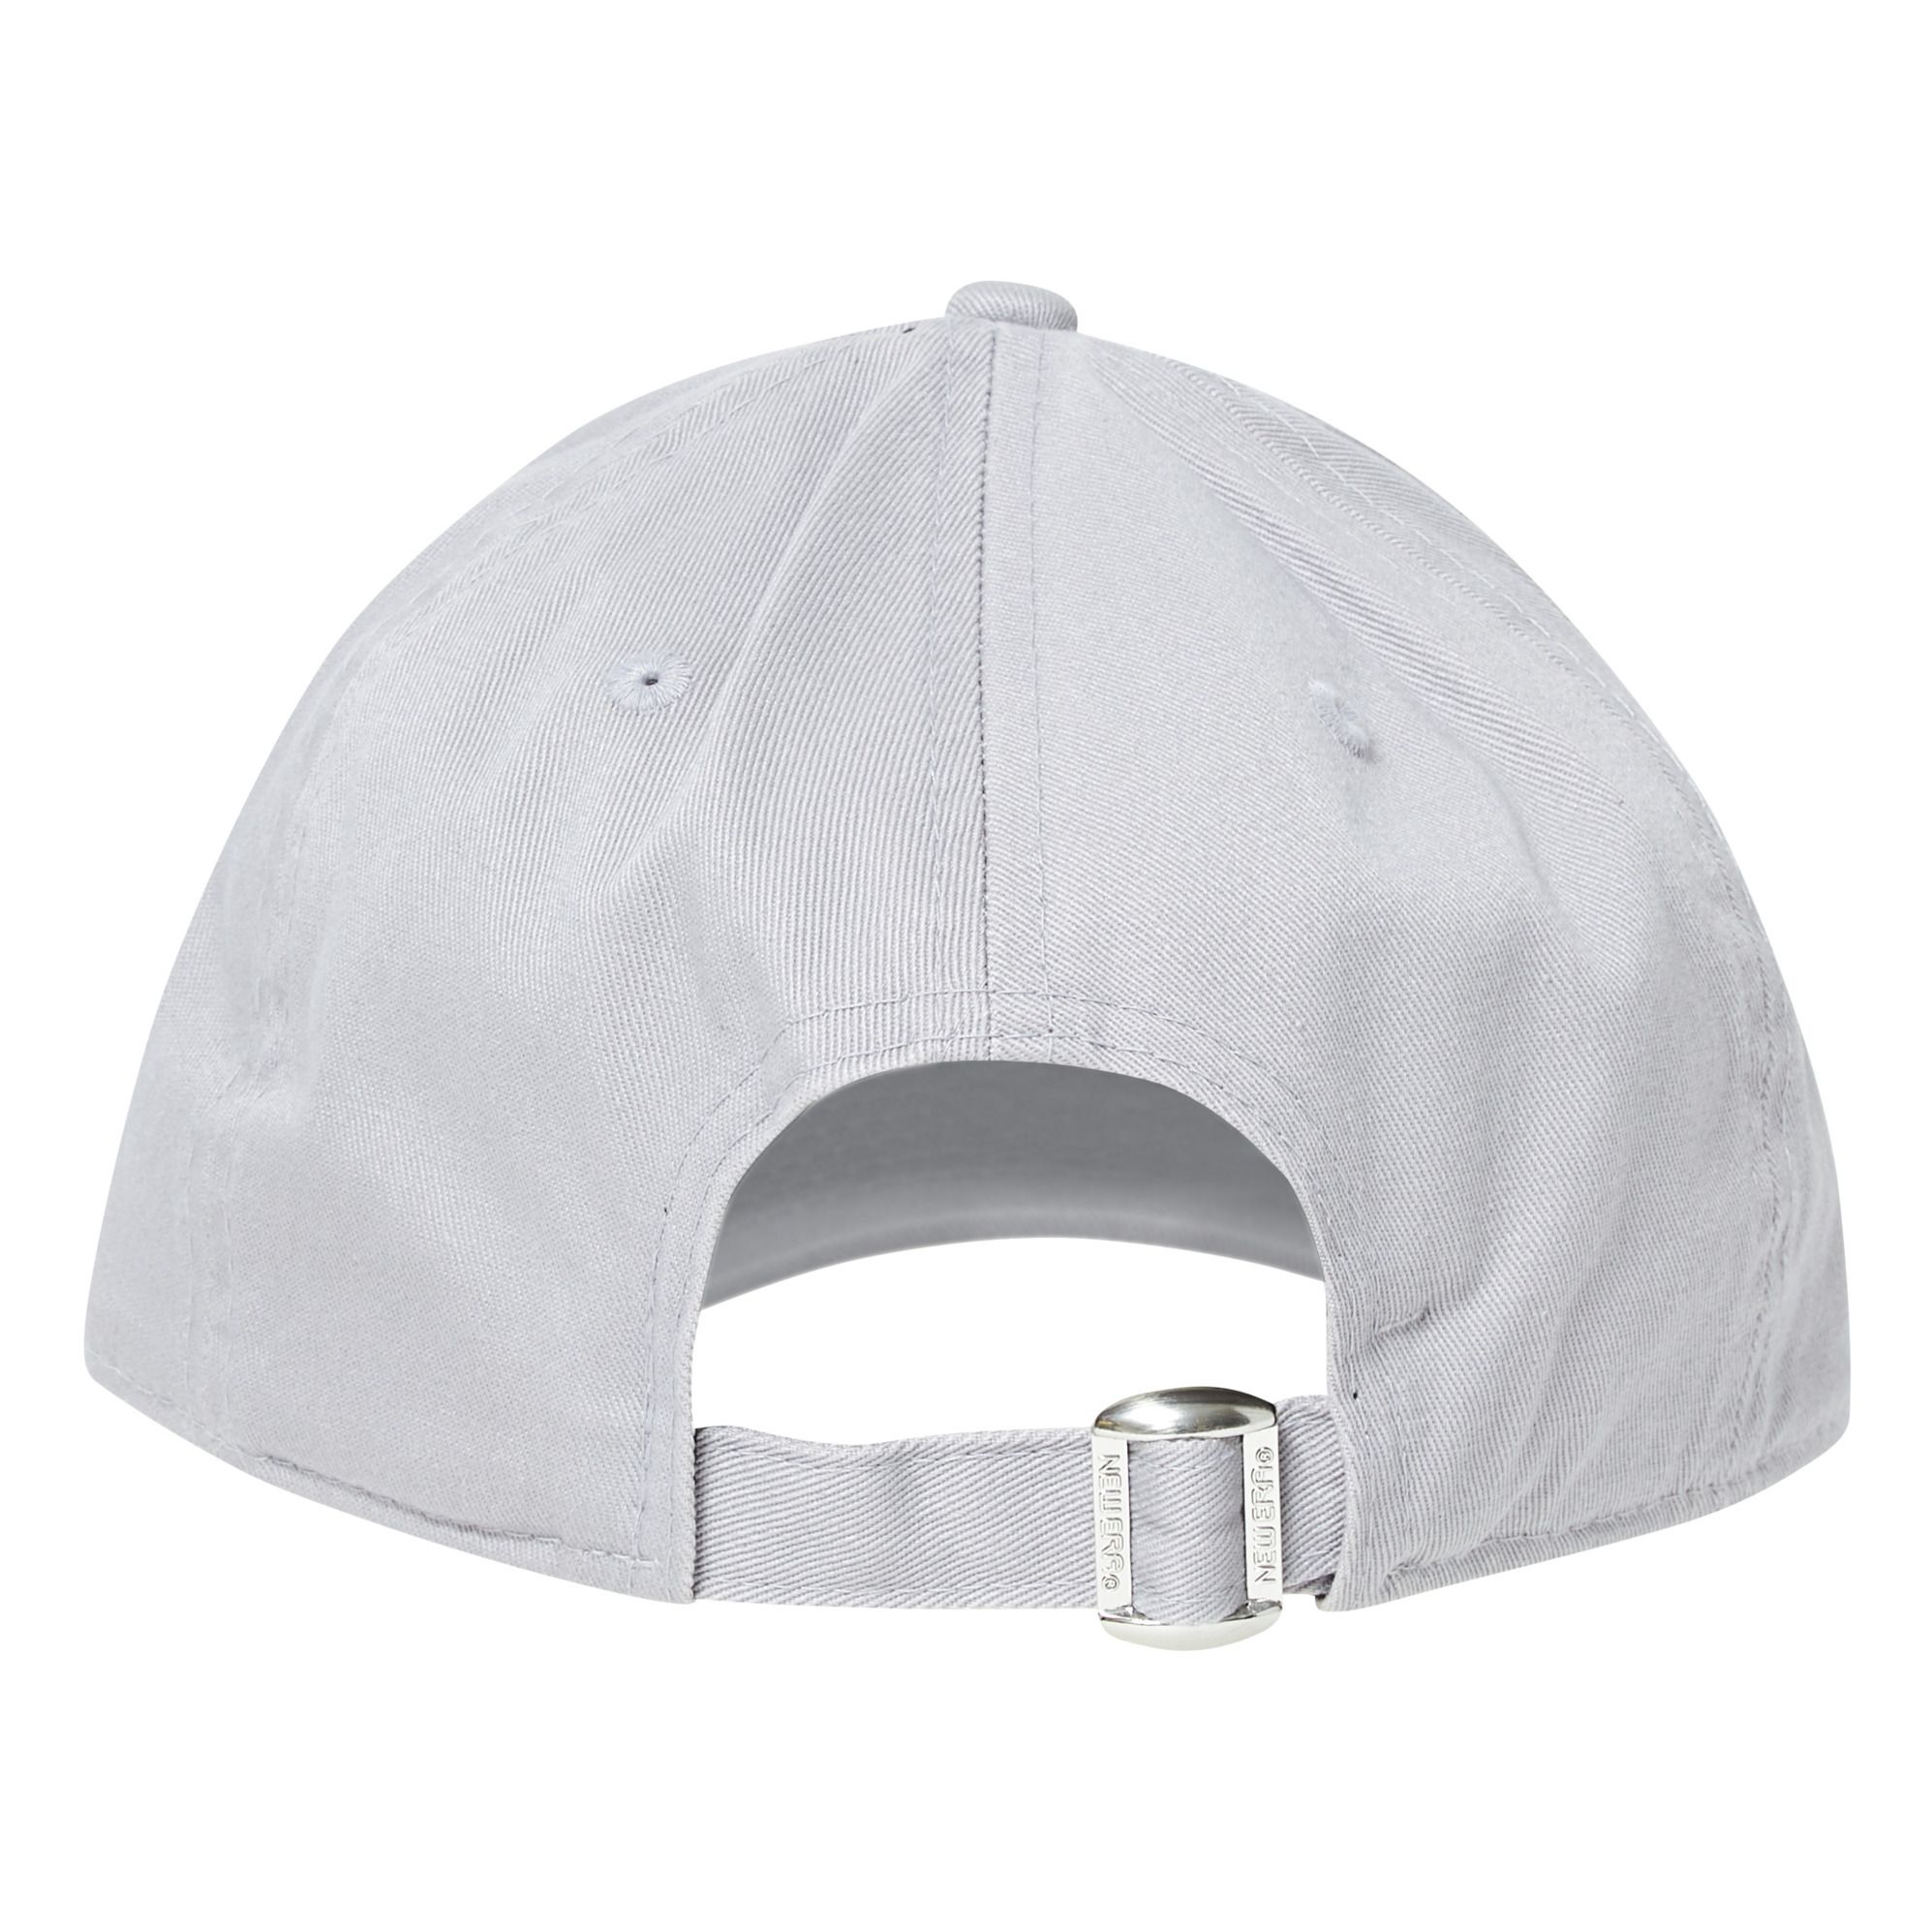 9Forty Cap - Adult Collection - Weiß- Produktbild Nr. 2